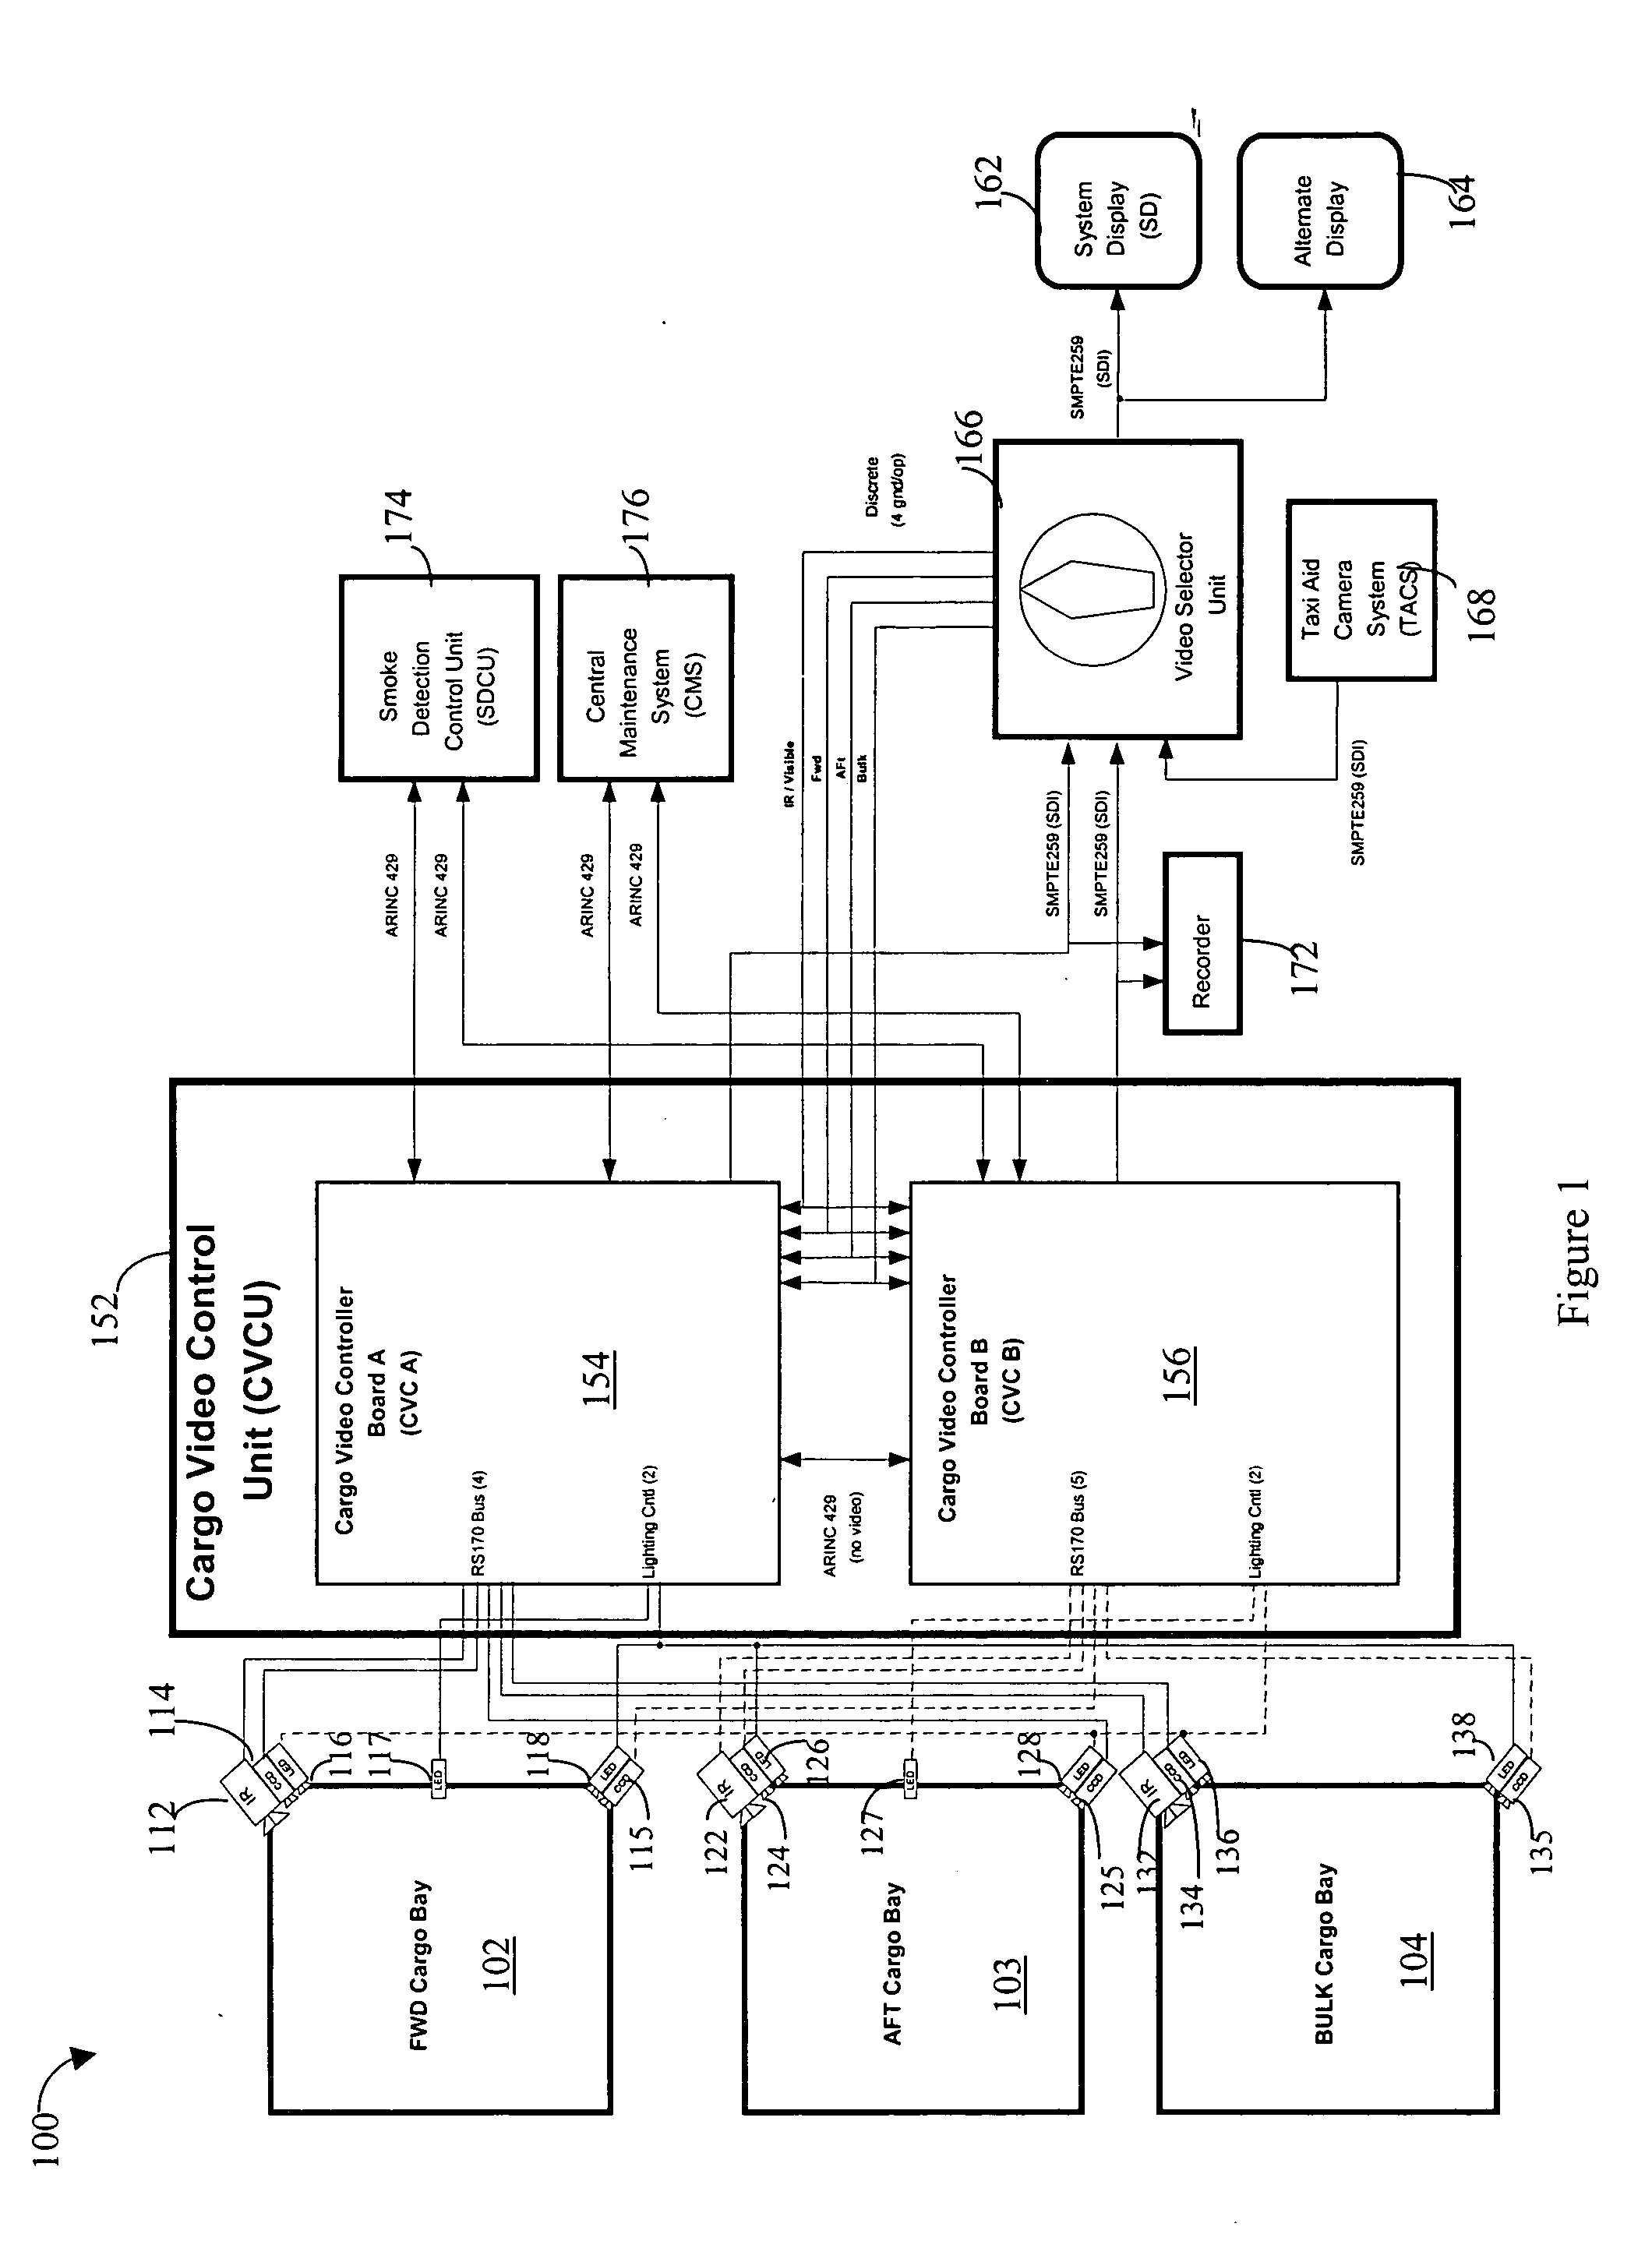 Method for detection and recognition of fog presence within an aircraft compartment using video images